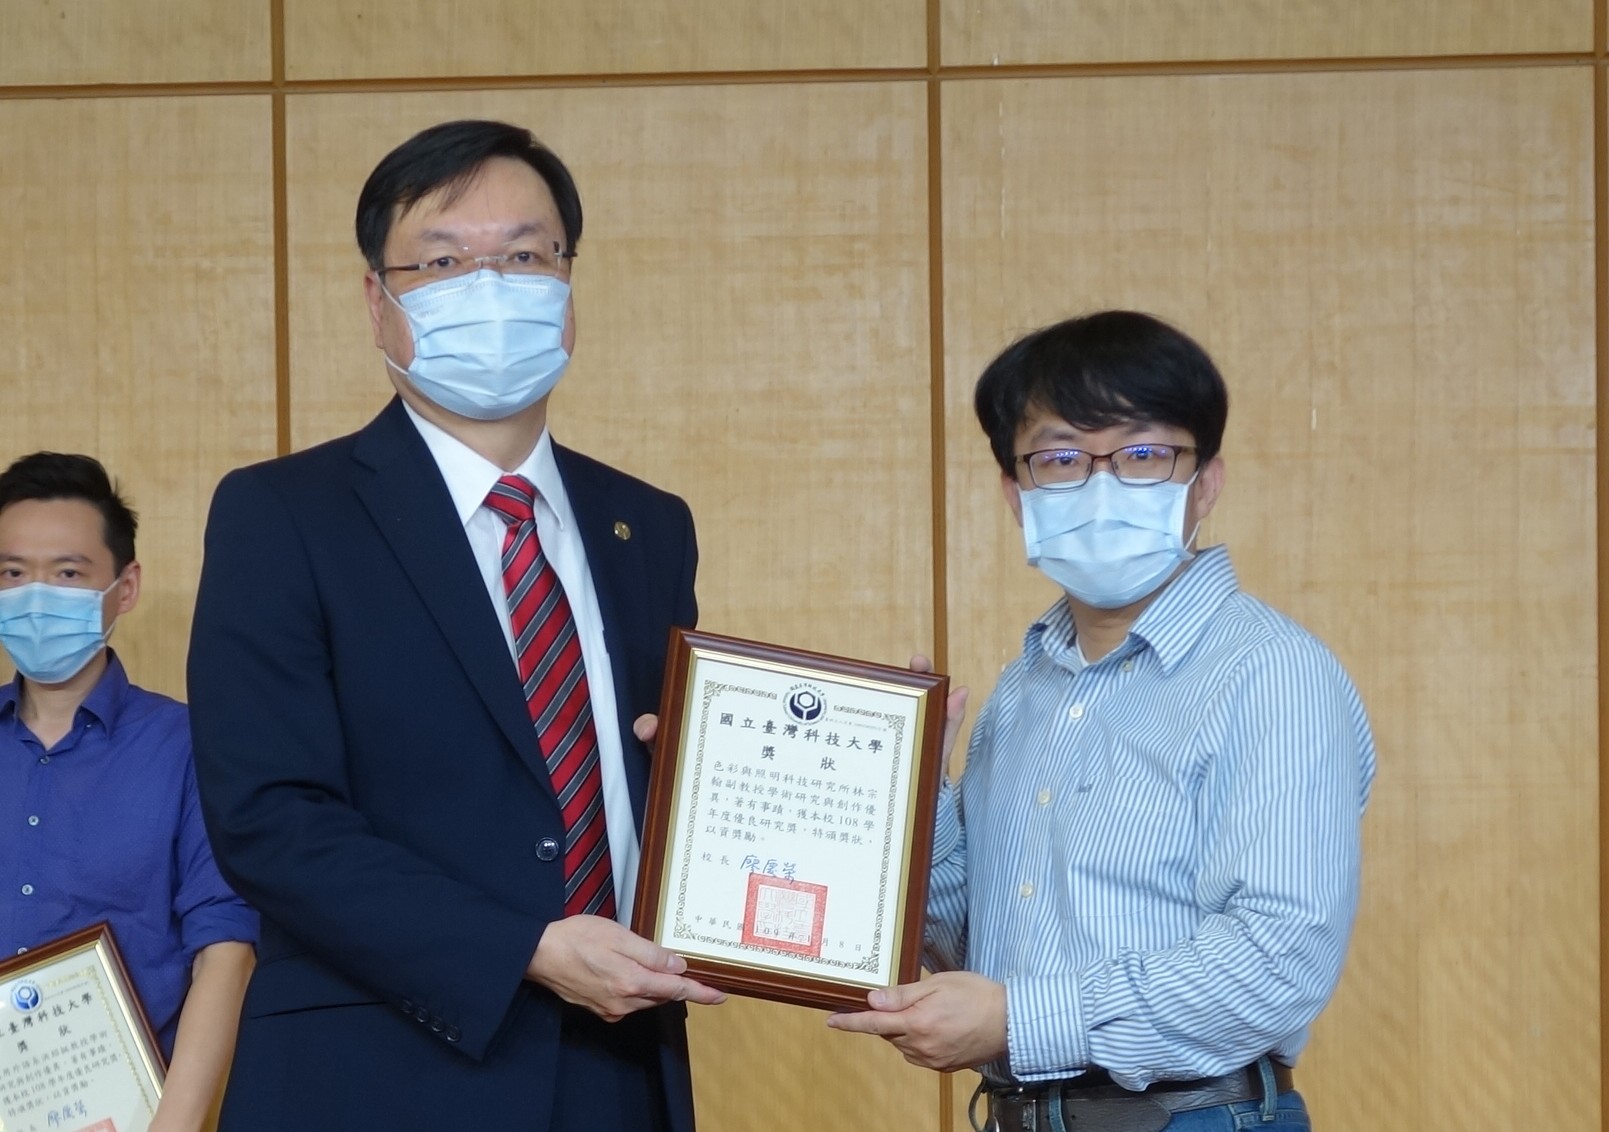 Dr. Lin wins distinguished research award of NTUST